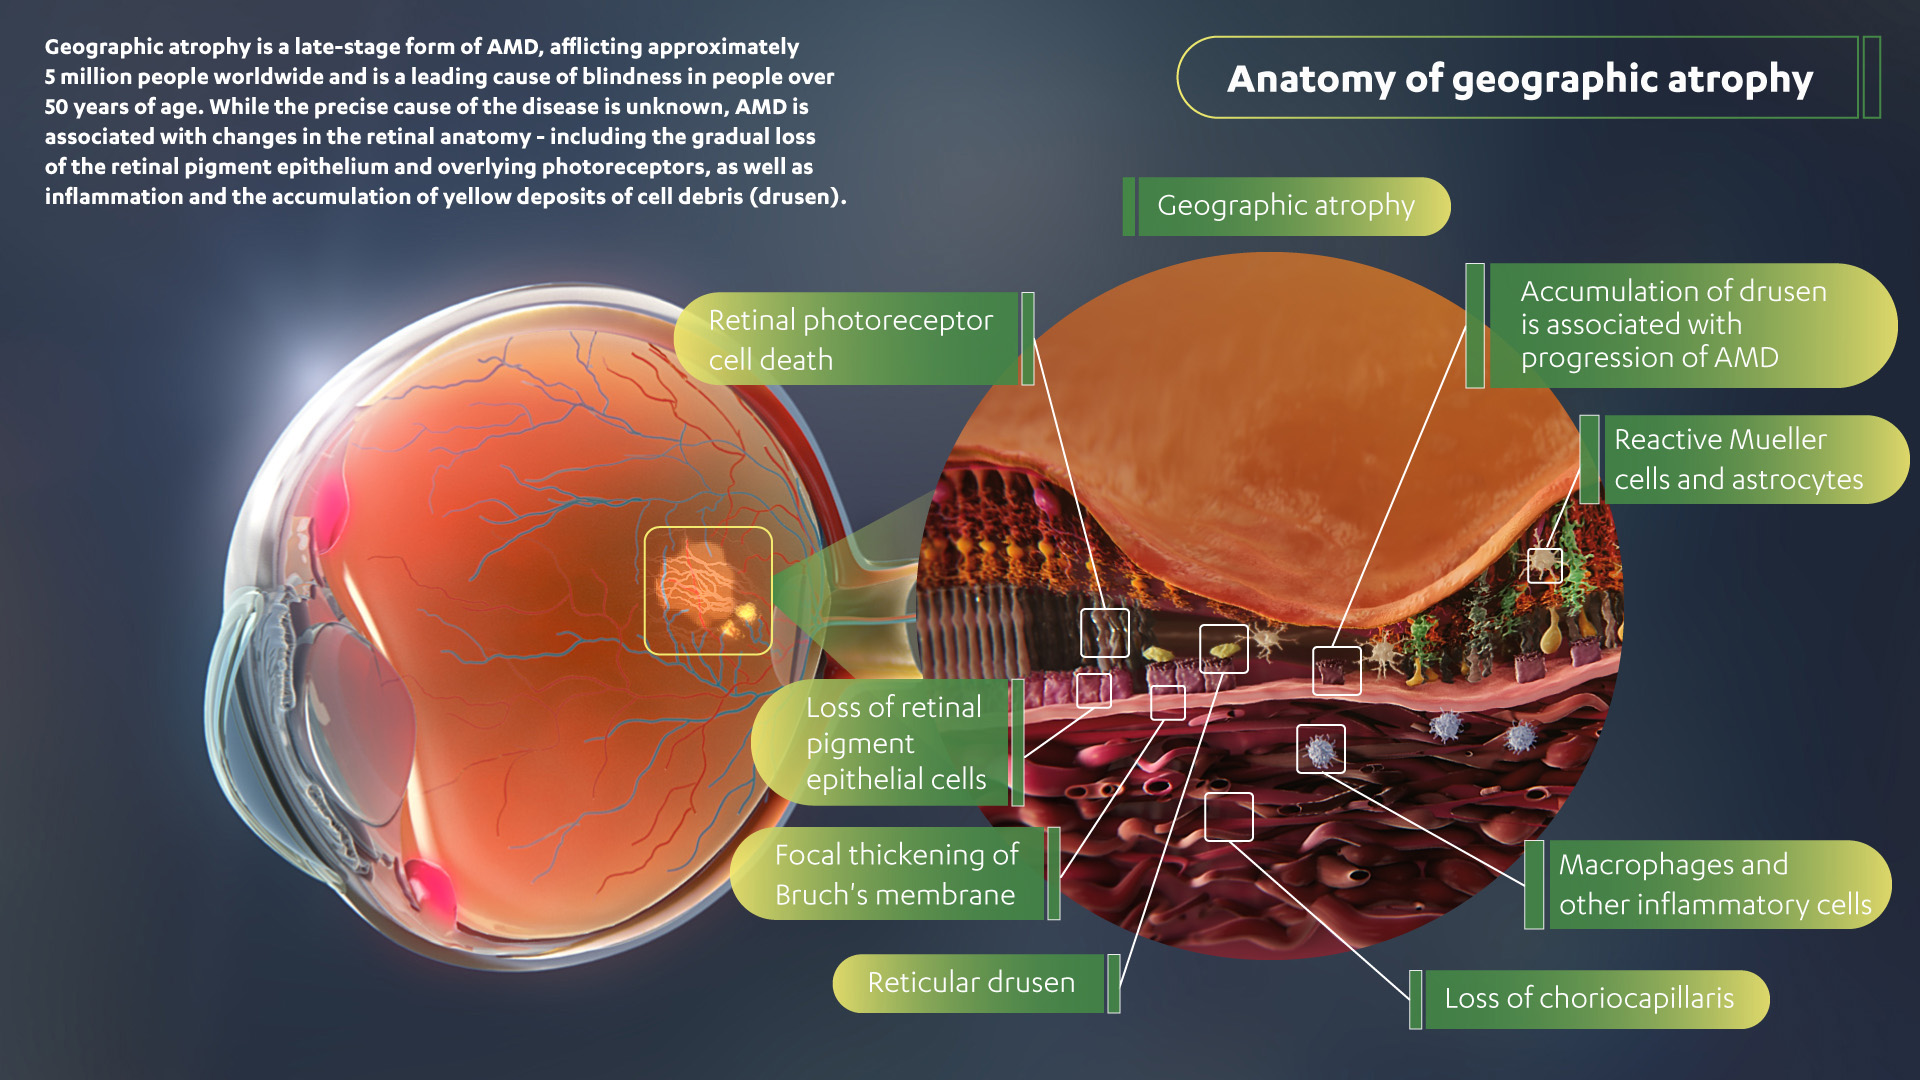 Multicolored anatomy of geographic atrophy in the retina. Shows retina photoreceptor cell death, loss of retinal pigment epithelial cells, focal thickening of Bruch's membrane, reticular drusen, loss of choriocapillaris, marcrophages and other inflammatory cells, the accumulation of drusen, and reactive Mueller cells and astrocytes.